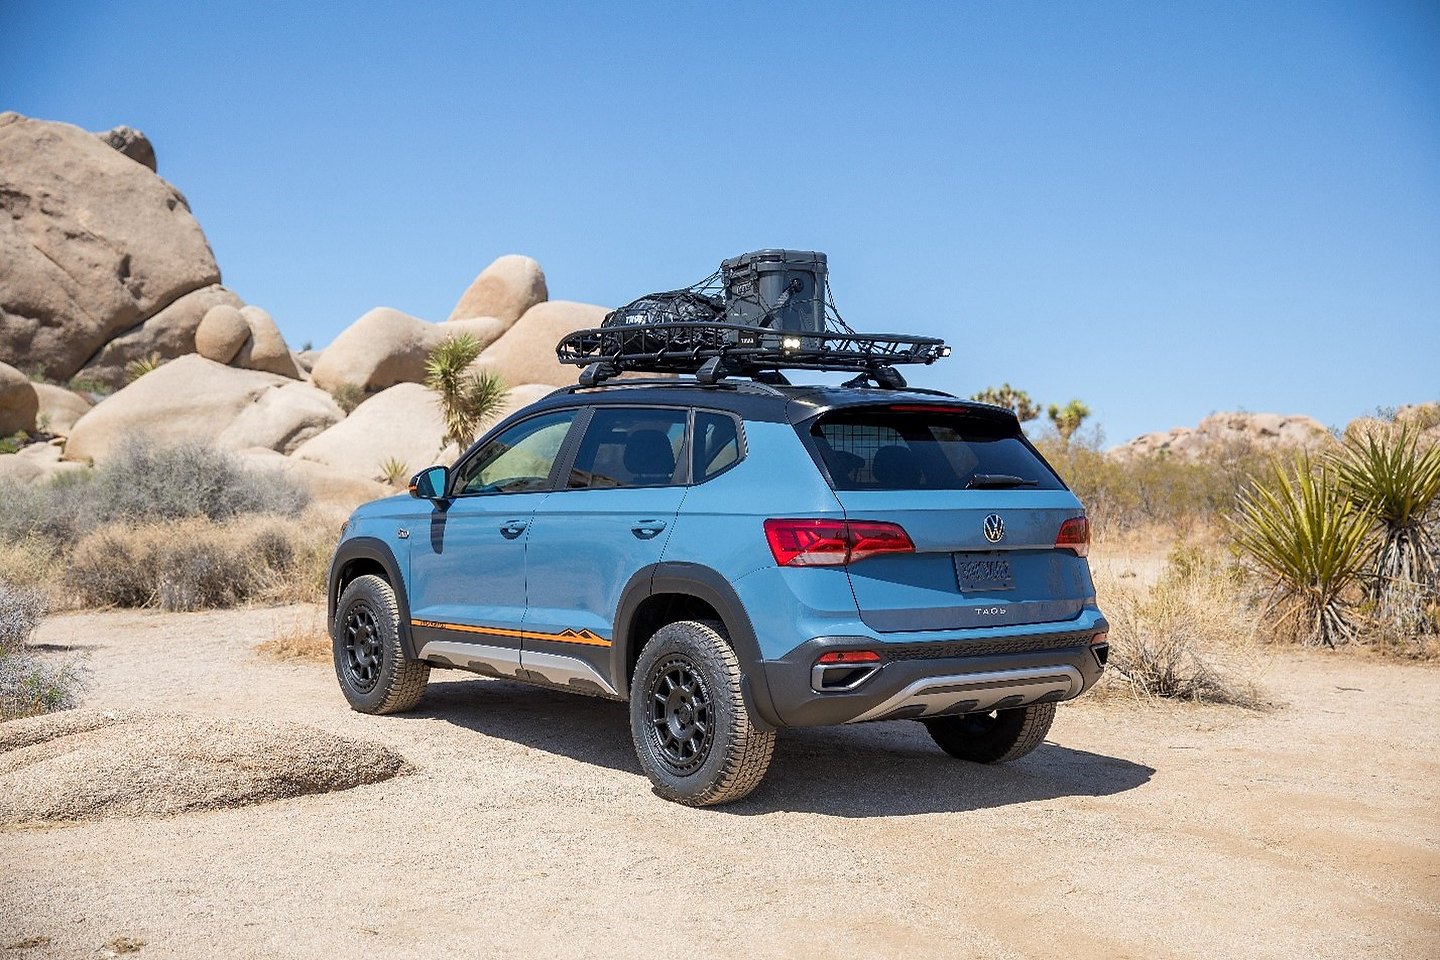 The taos basecamp concept shows us that vw's smallest suv can be a proper adventure vehicle